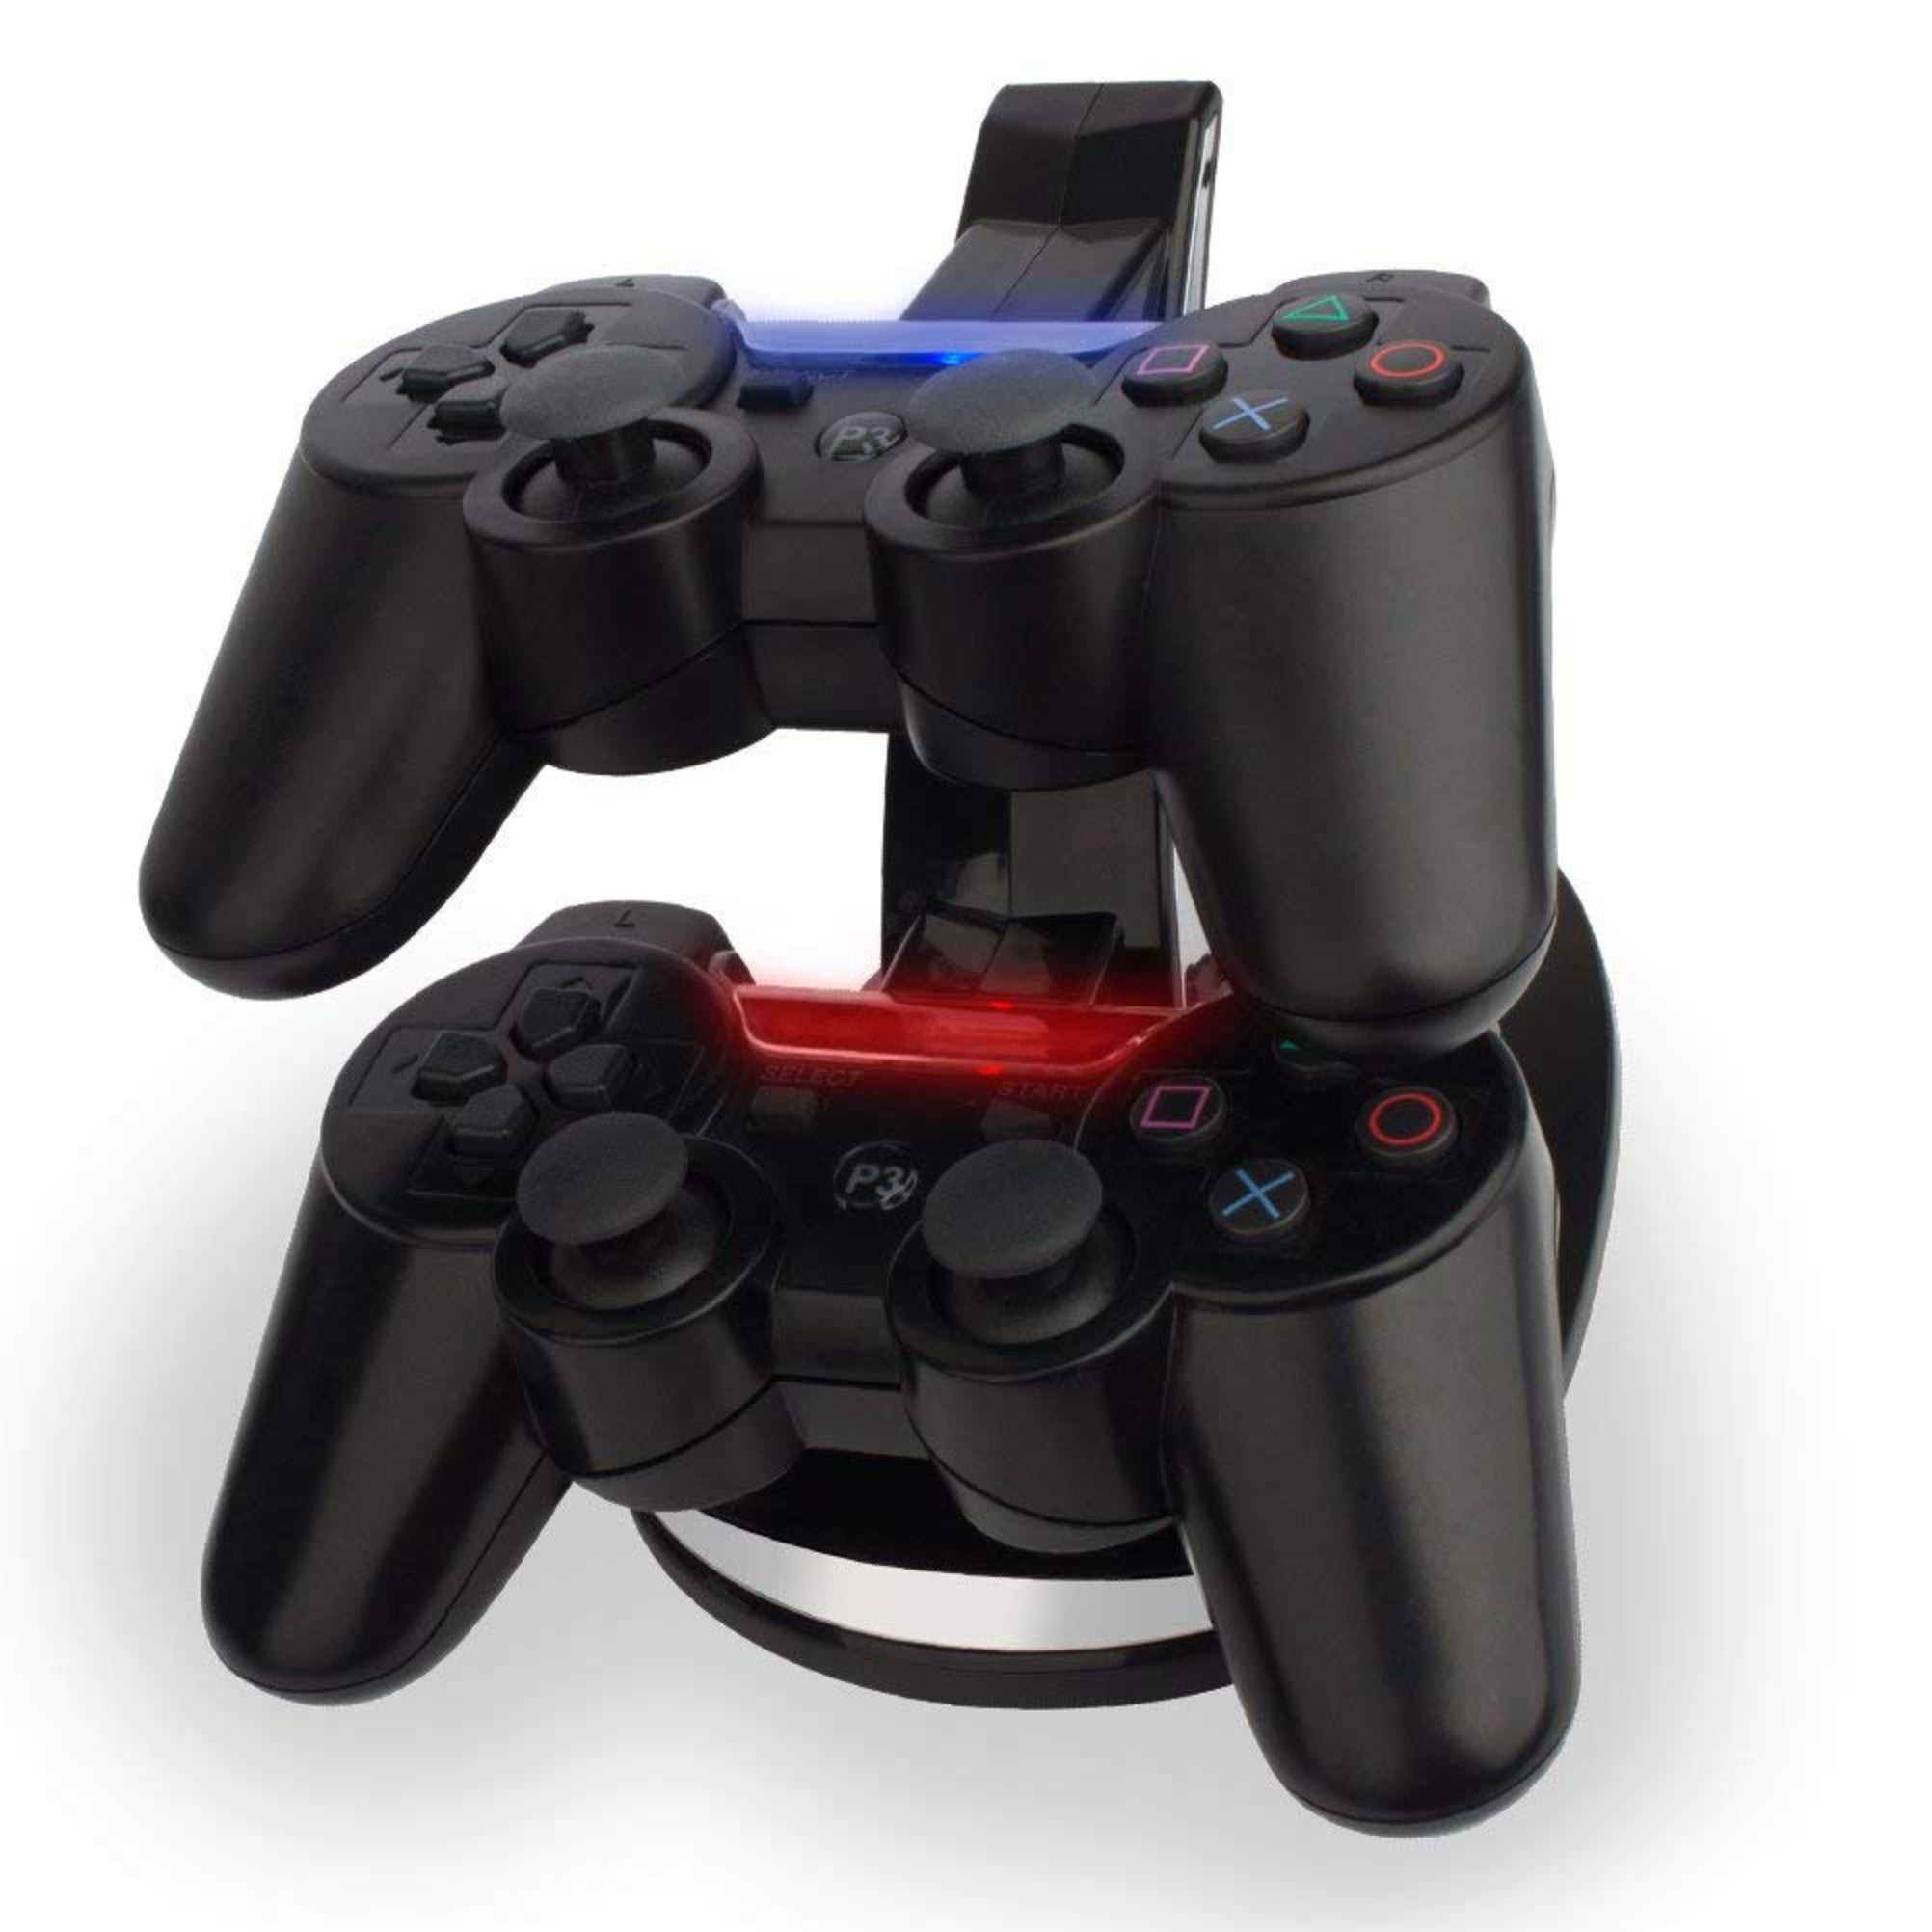 does standoff 2 have controller support